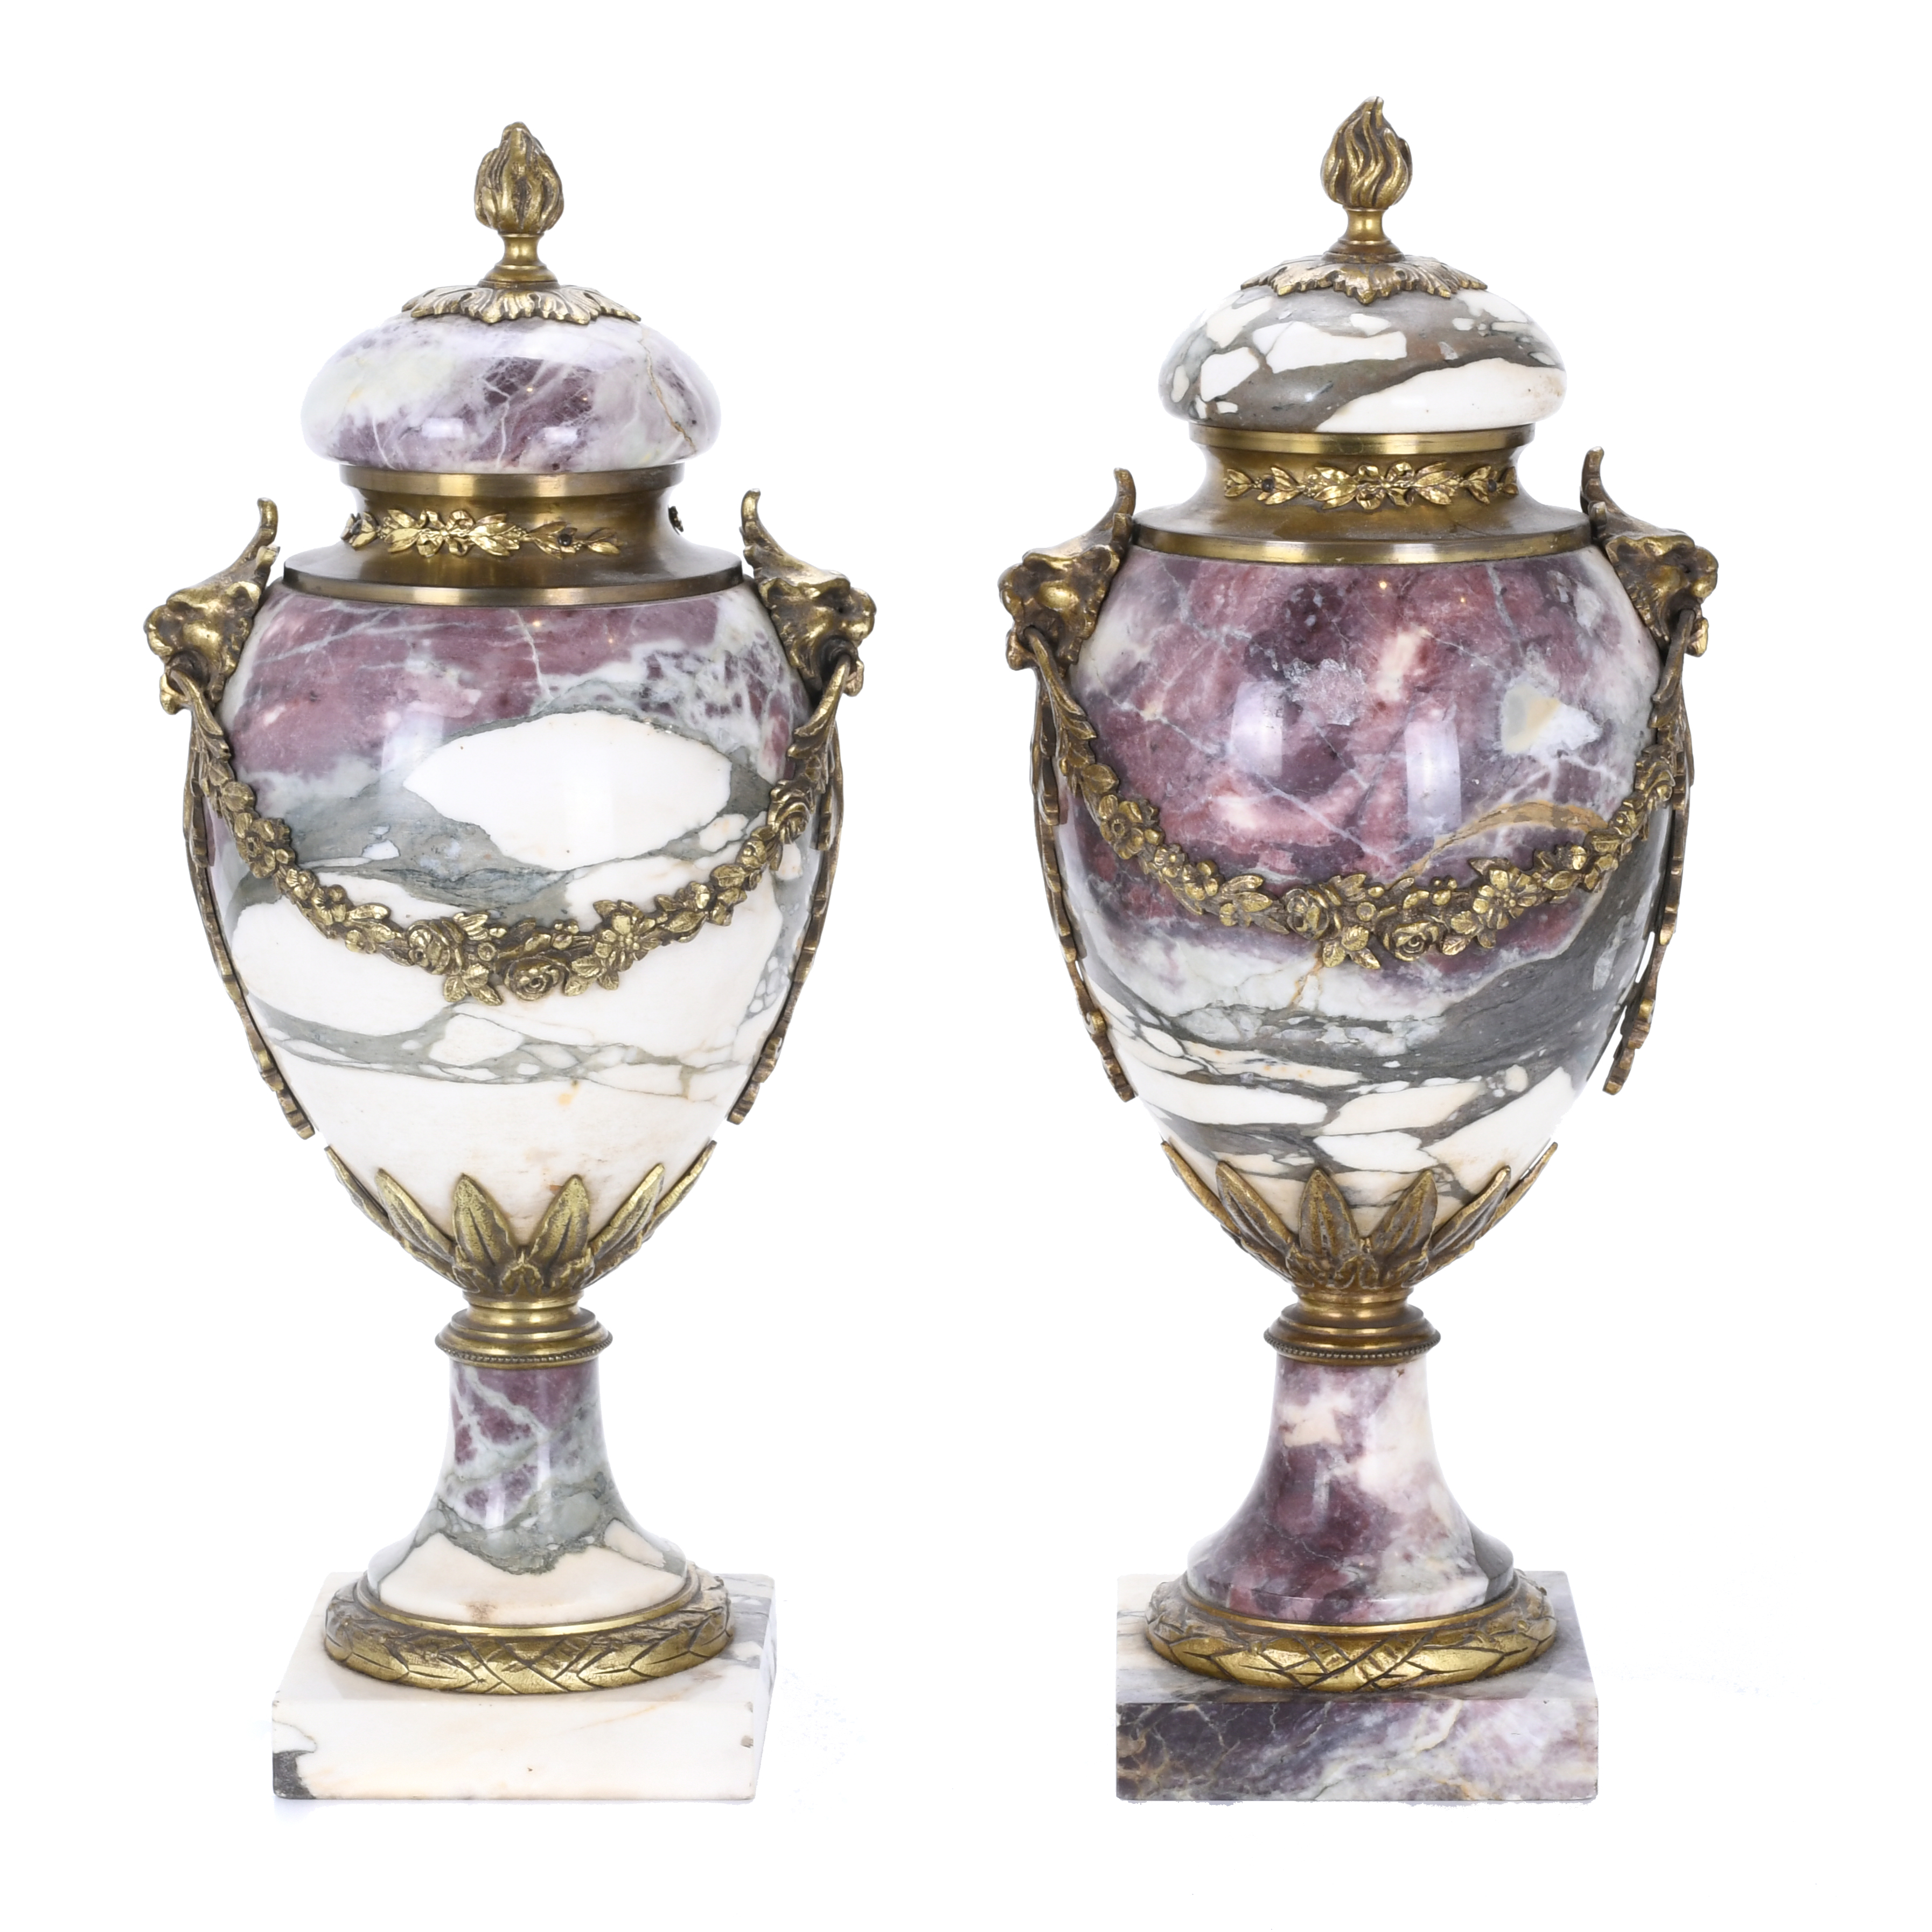 PAIR OF DECORATIVE GOBLETS, LOUIS XVI STYLE, LATE 19TH CENT